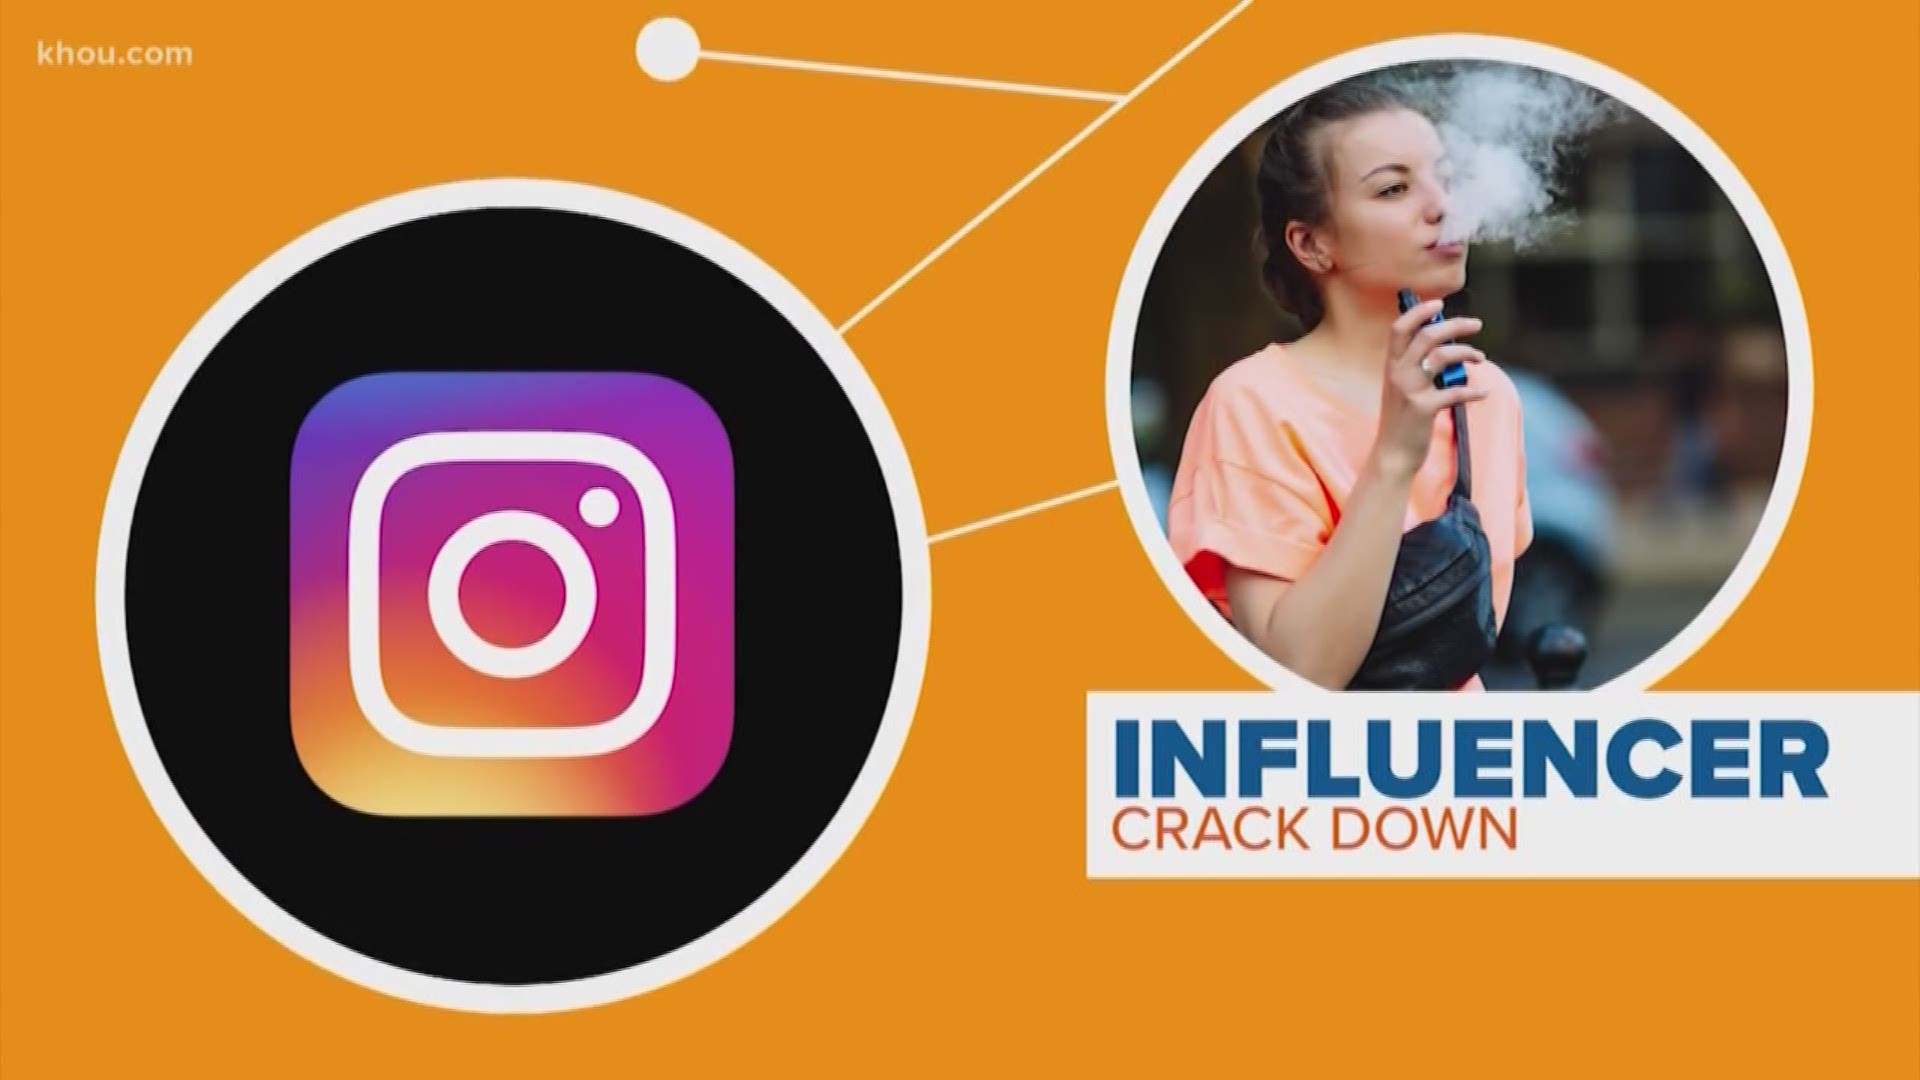 You see the posts all over your Instagram feed, influencers, trying to sell you on a product. But a new report raises some concerns about the trend. Rekha Muddaraj connects the dots.